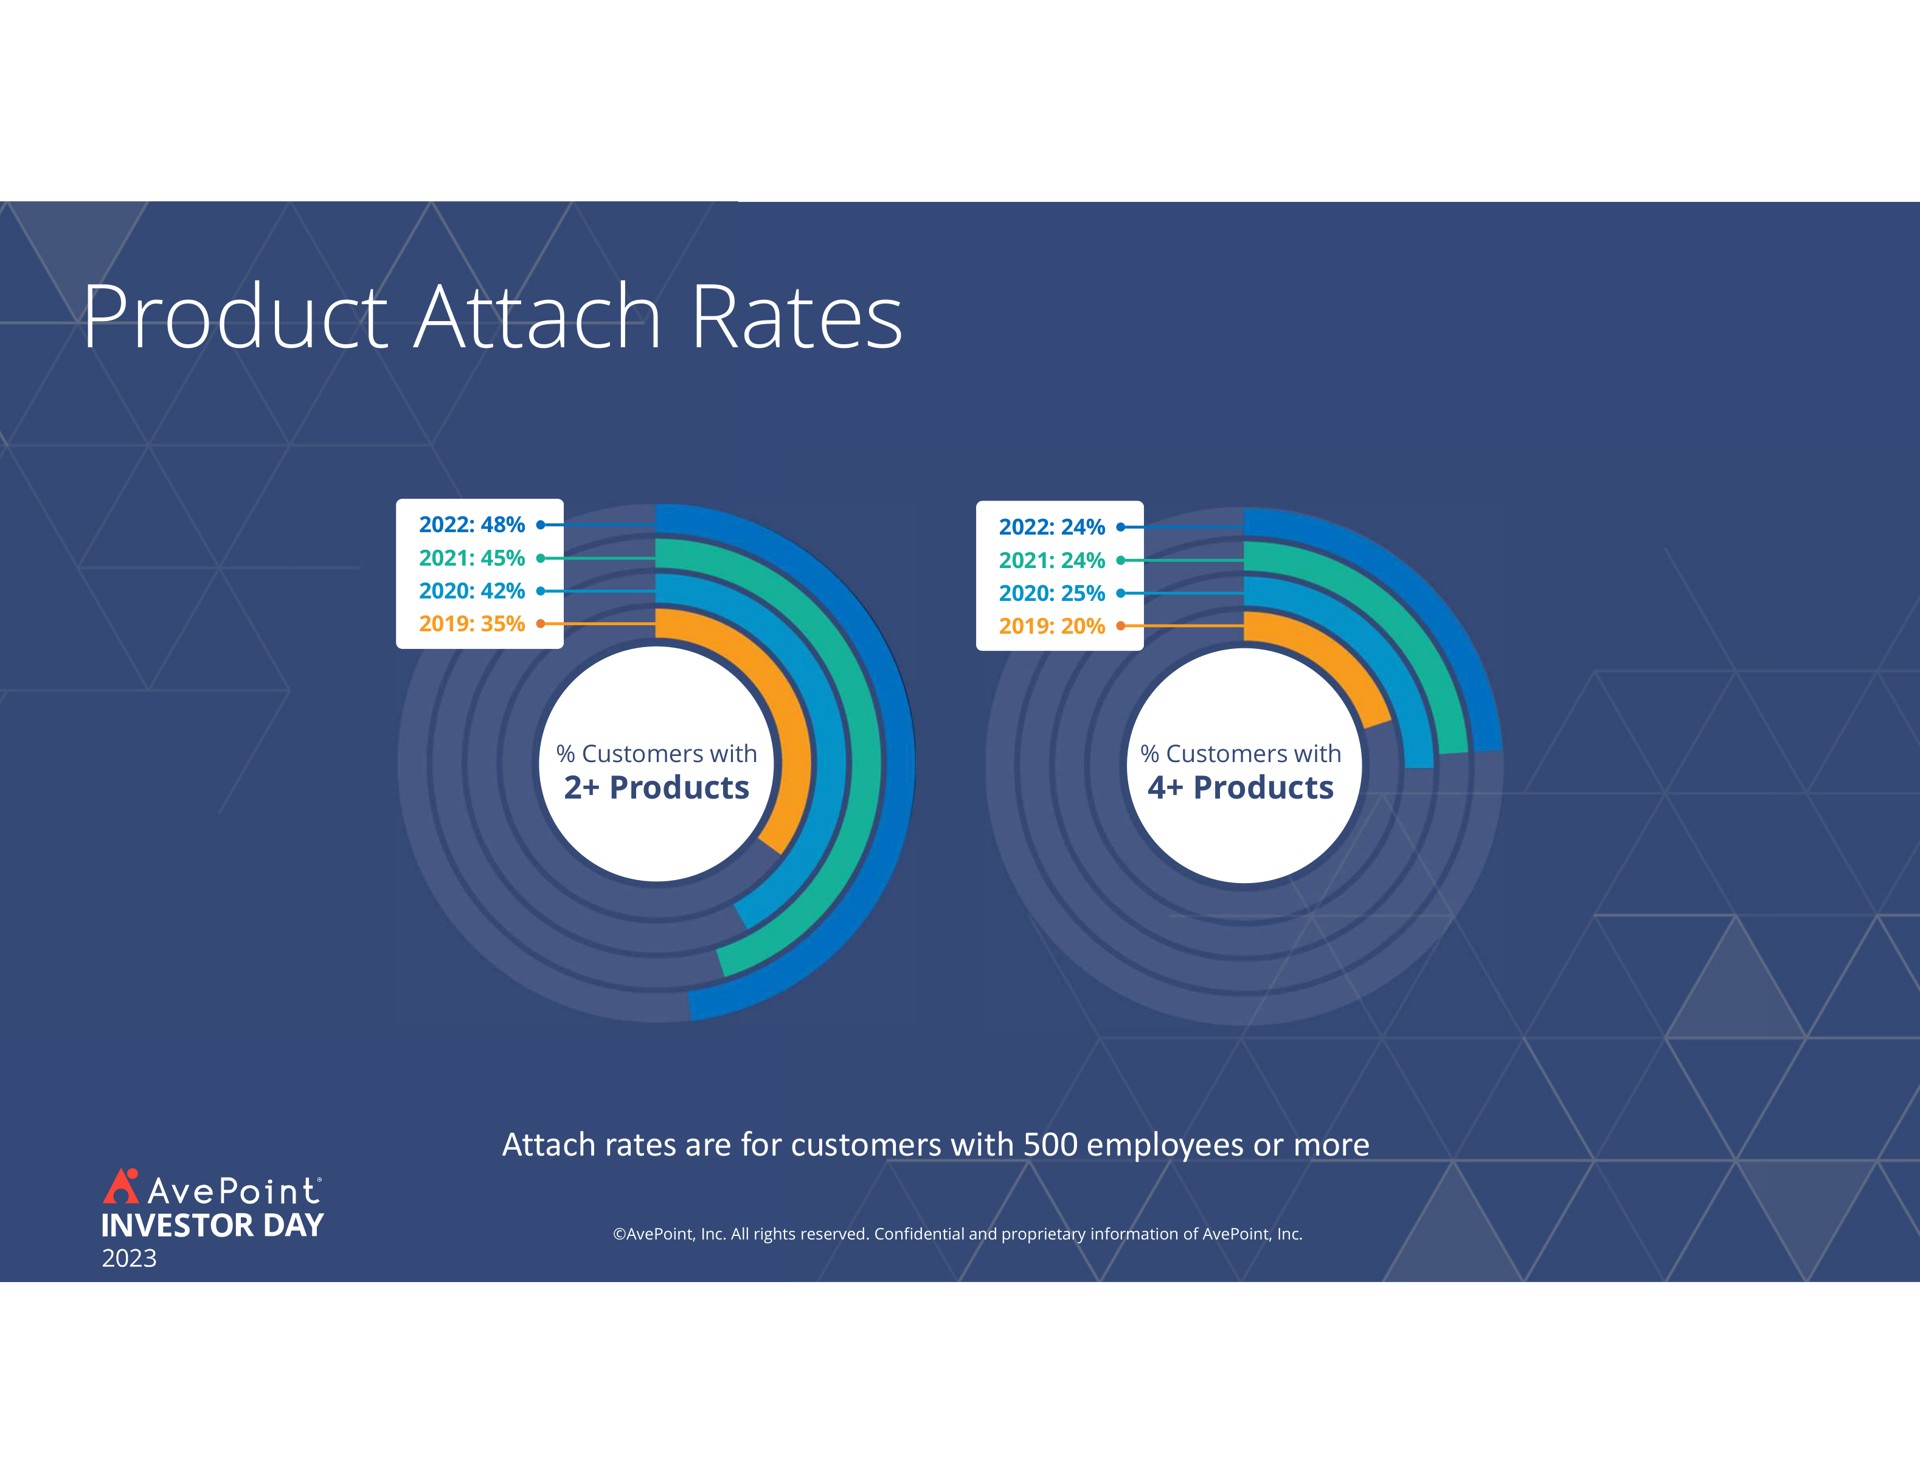 product attach rates are for customers with employees or more | AvePoint